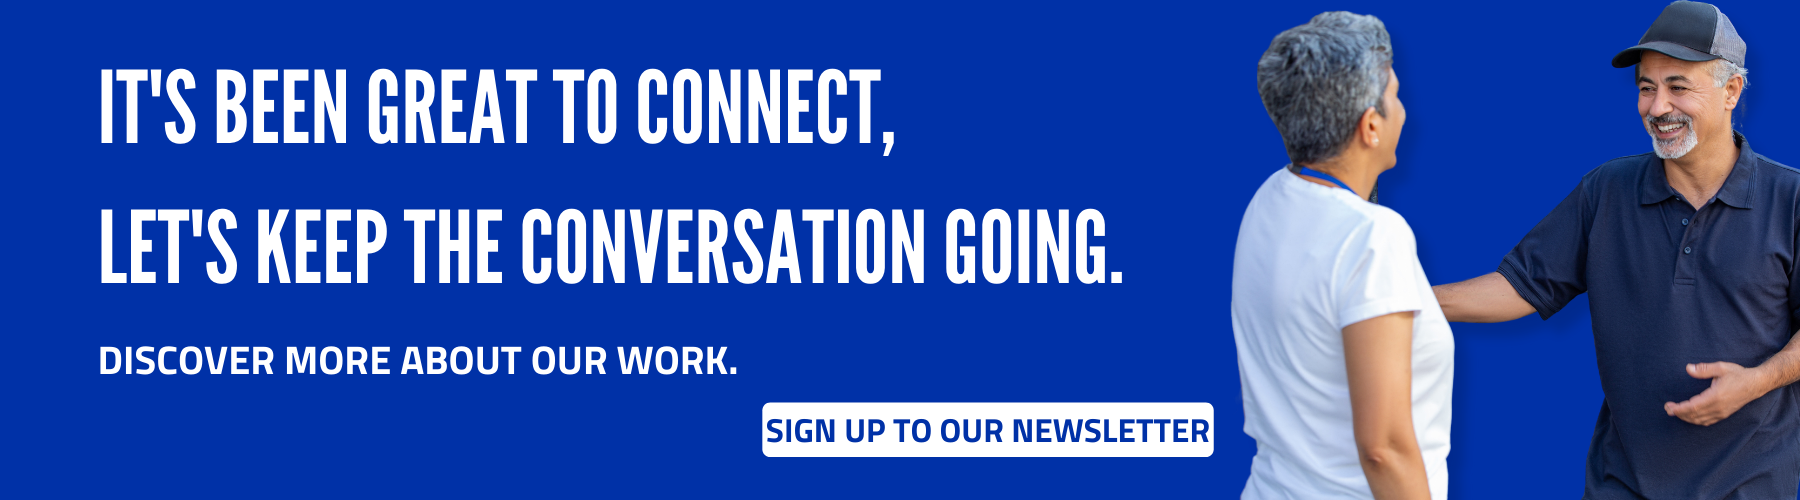 sign up to our newsletter to learn more